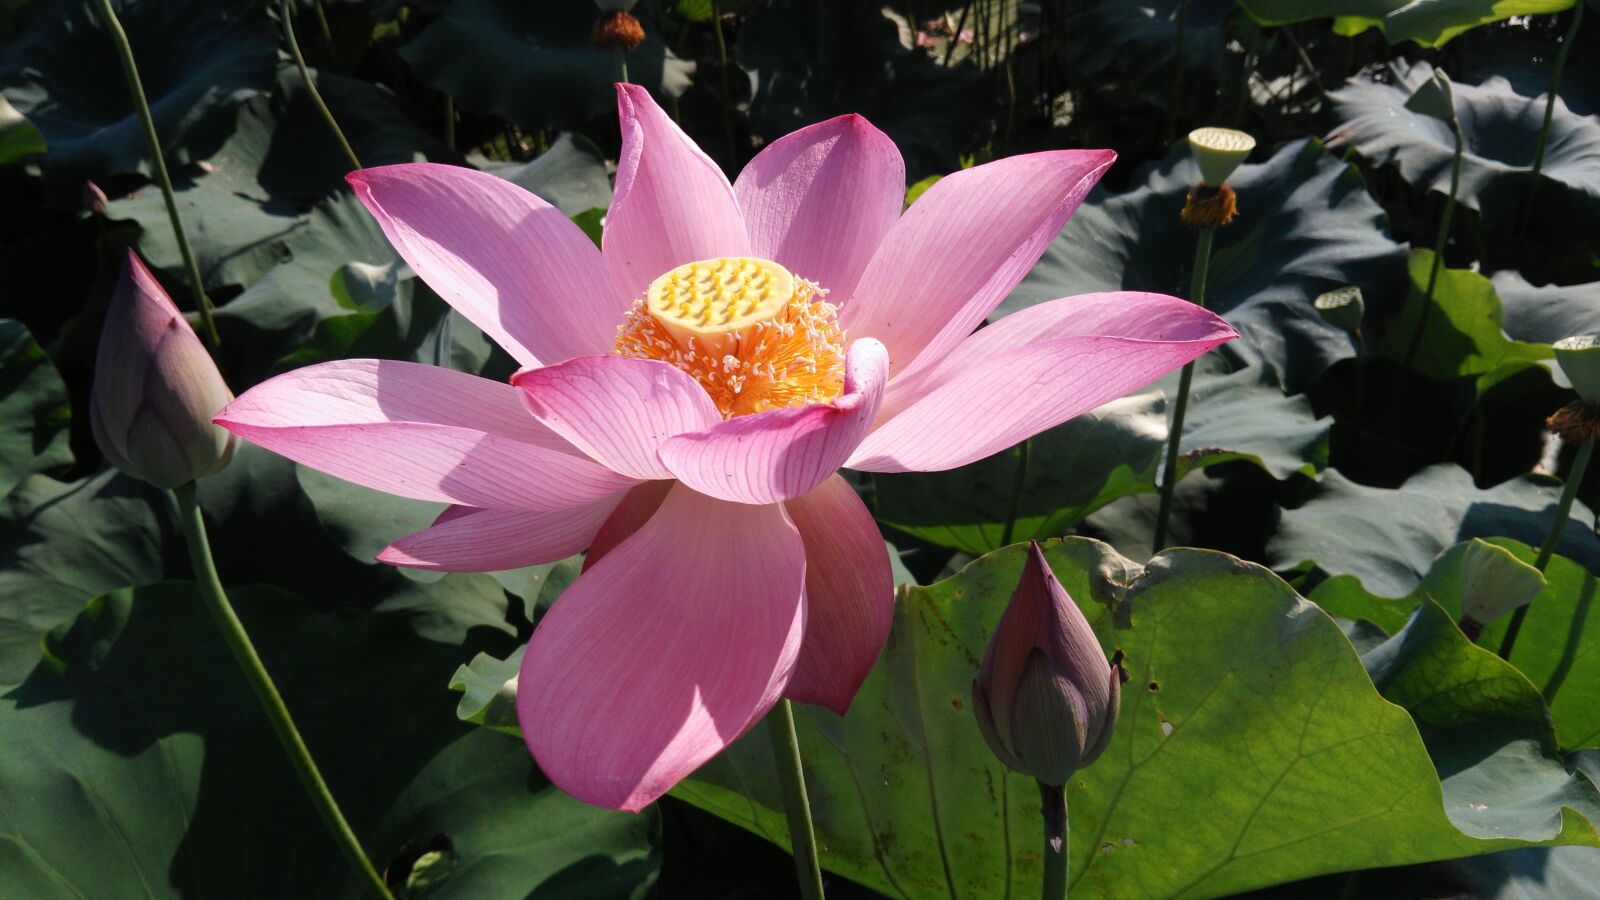 HUAWEI Che1-CL20 sample photo. Lotus, summer, good weather photography